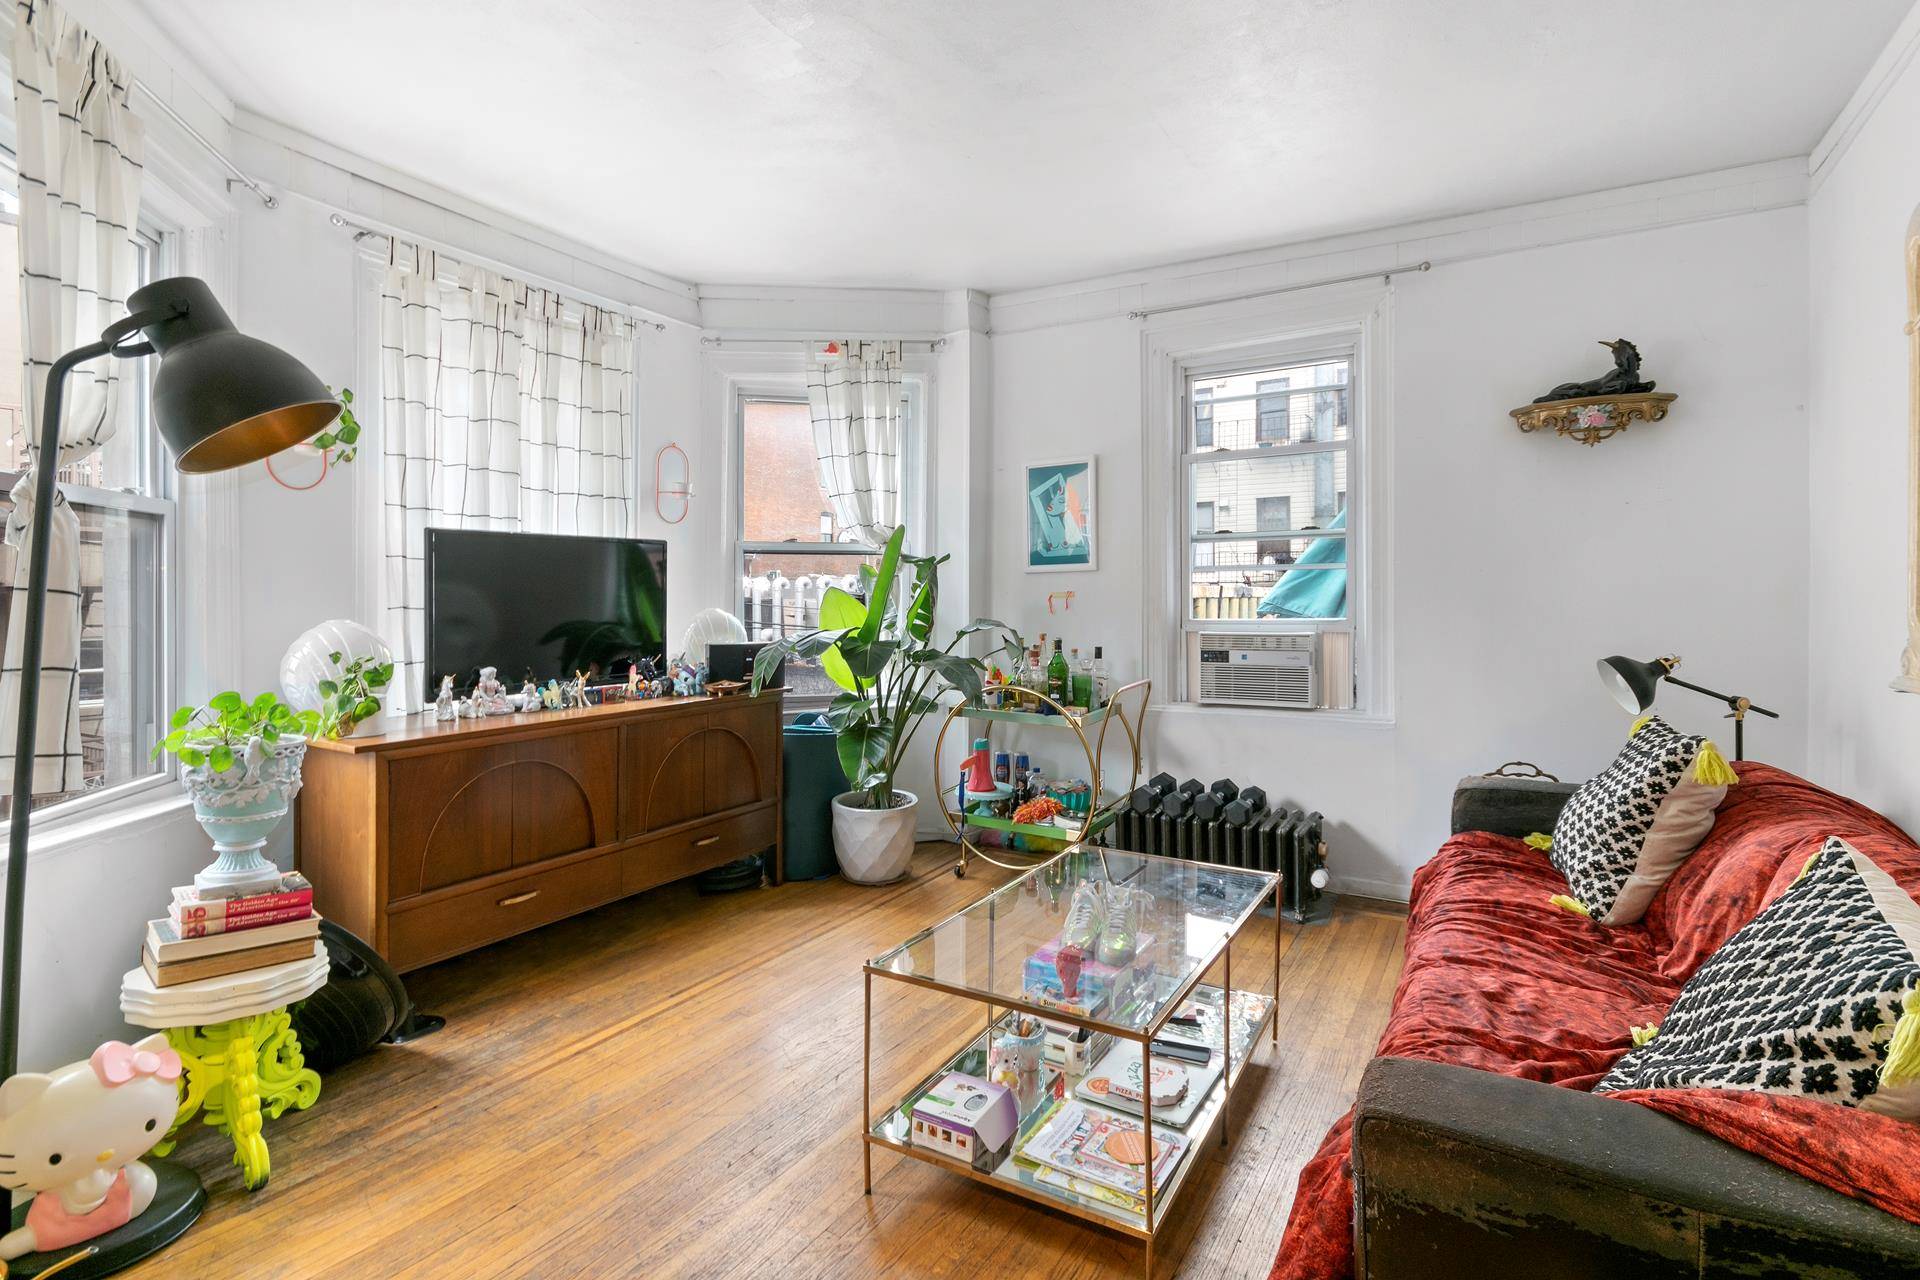 This large two bedroom apartment features two good sized bedrooms, incredible light, and a location that is easy access to everything you love about Williamsburg.